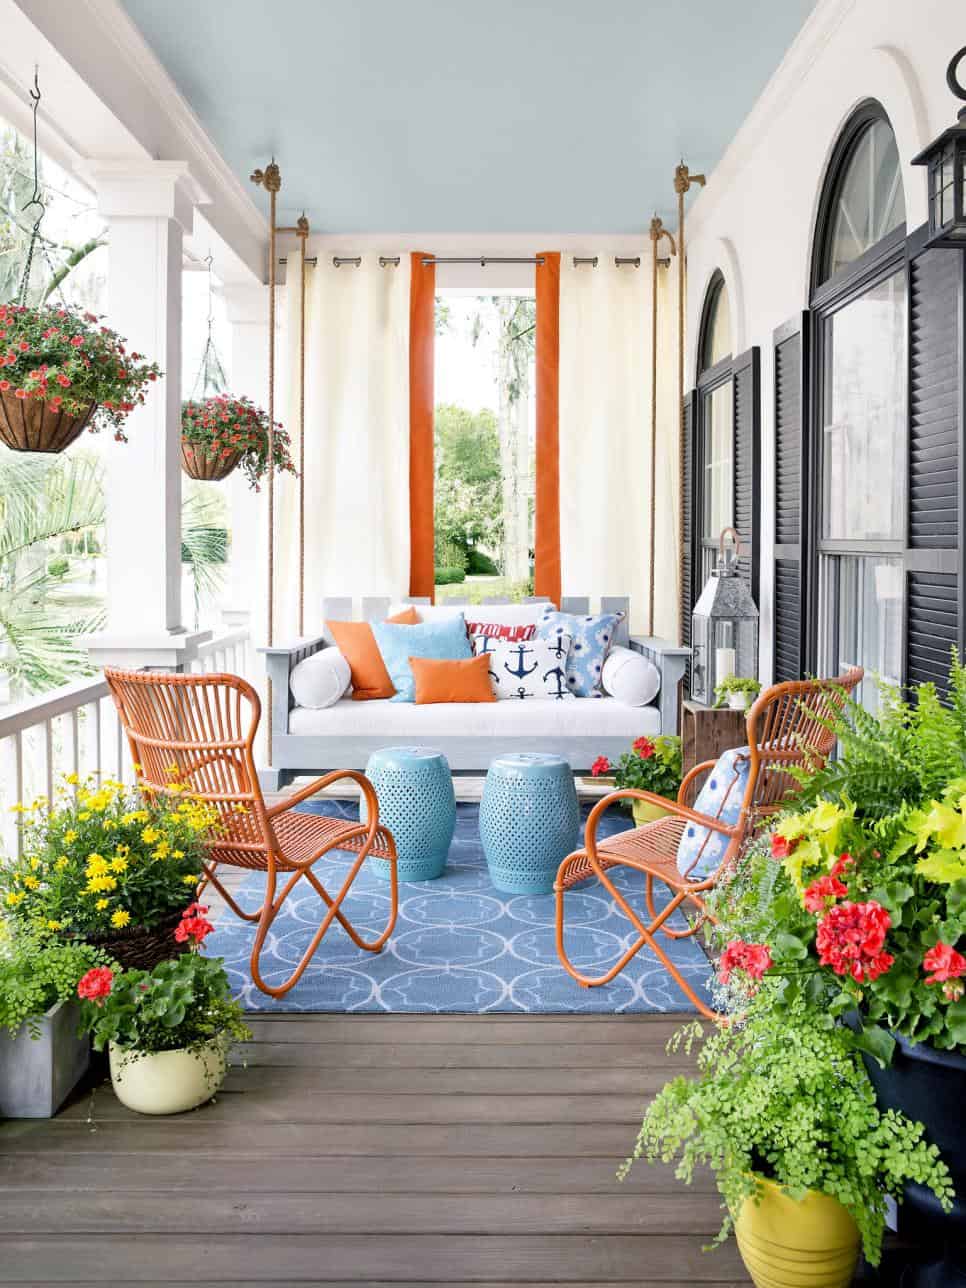 10 Ways To Decorate Your Porch This Summer